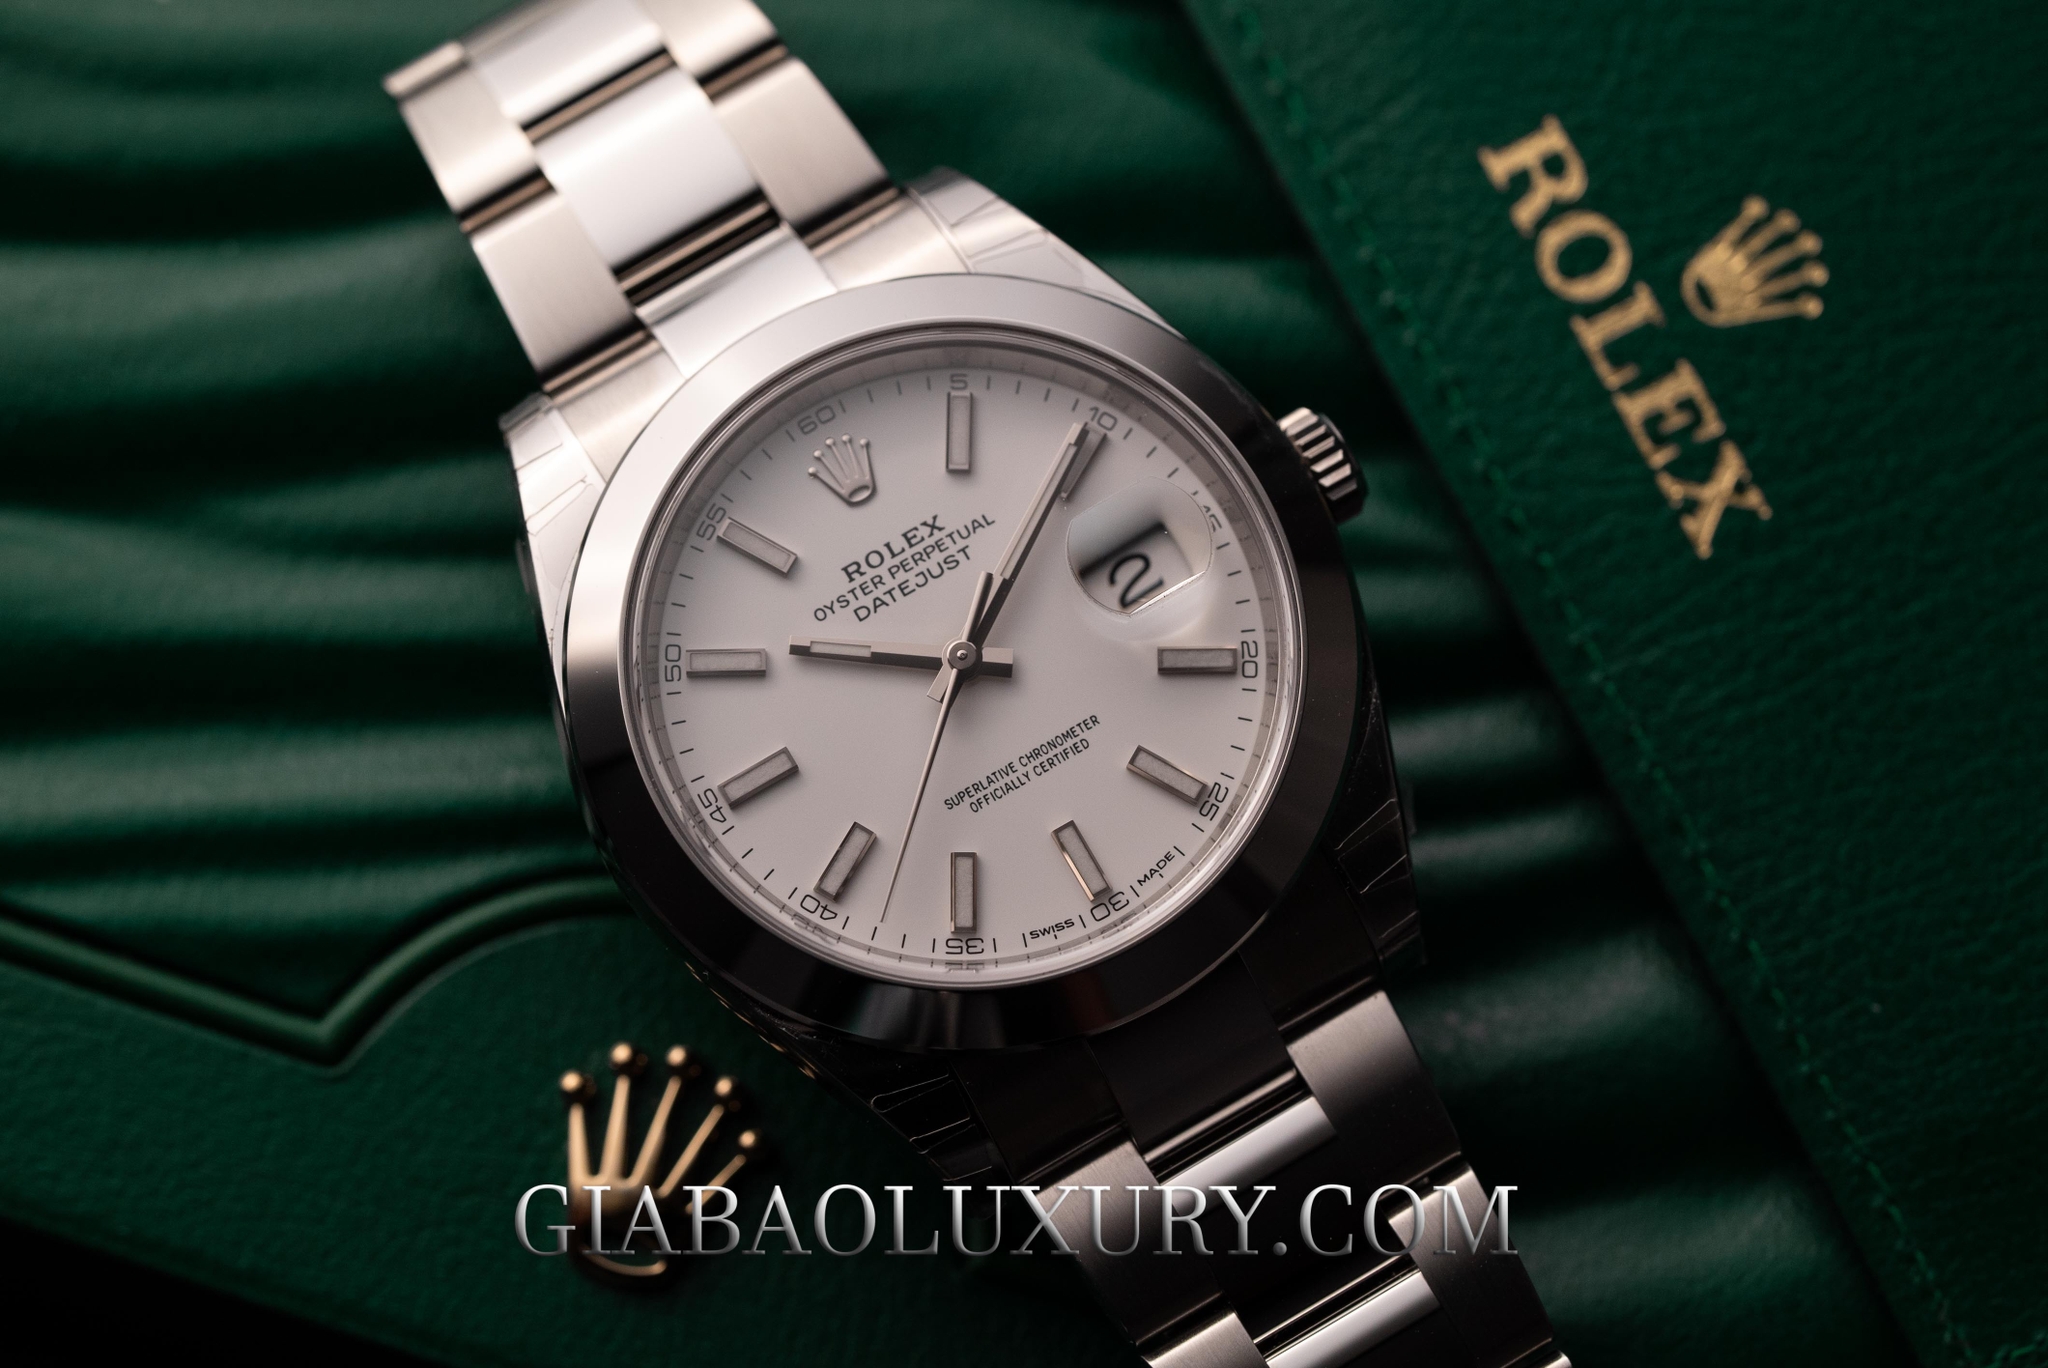 Đồng Hồ Rolex Datejust 41 126300 Mặt Số Trắng Dây Đeo Oyster